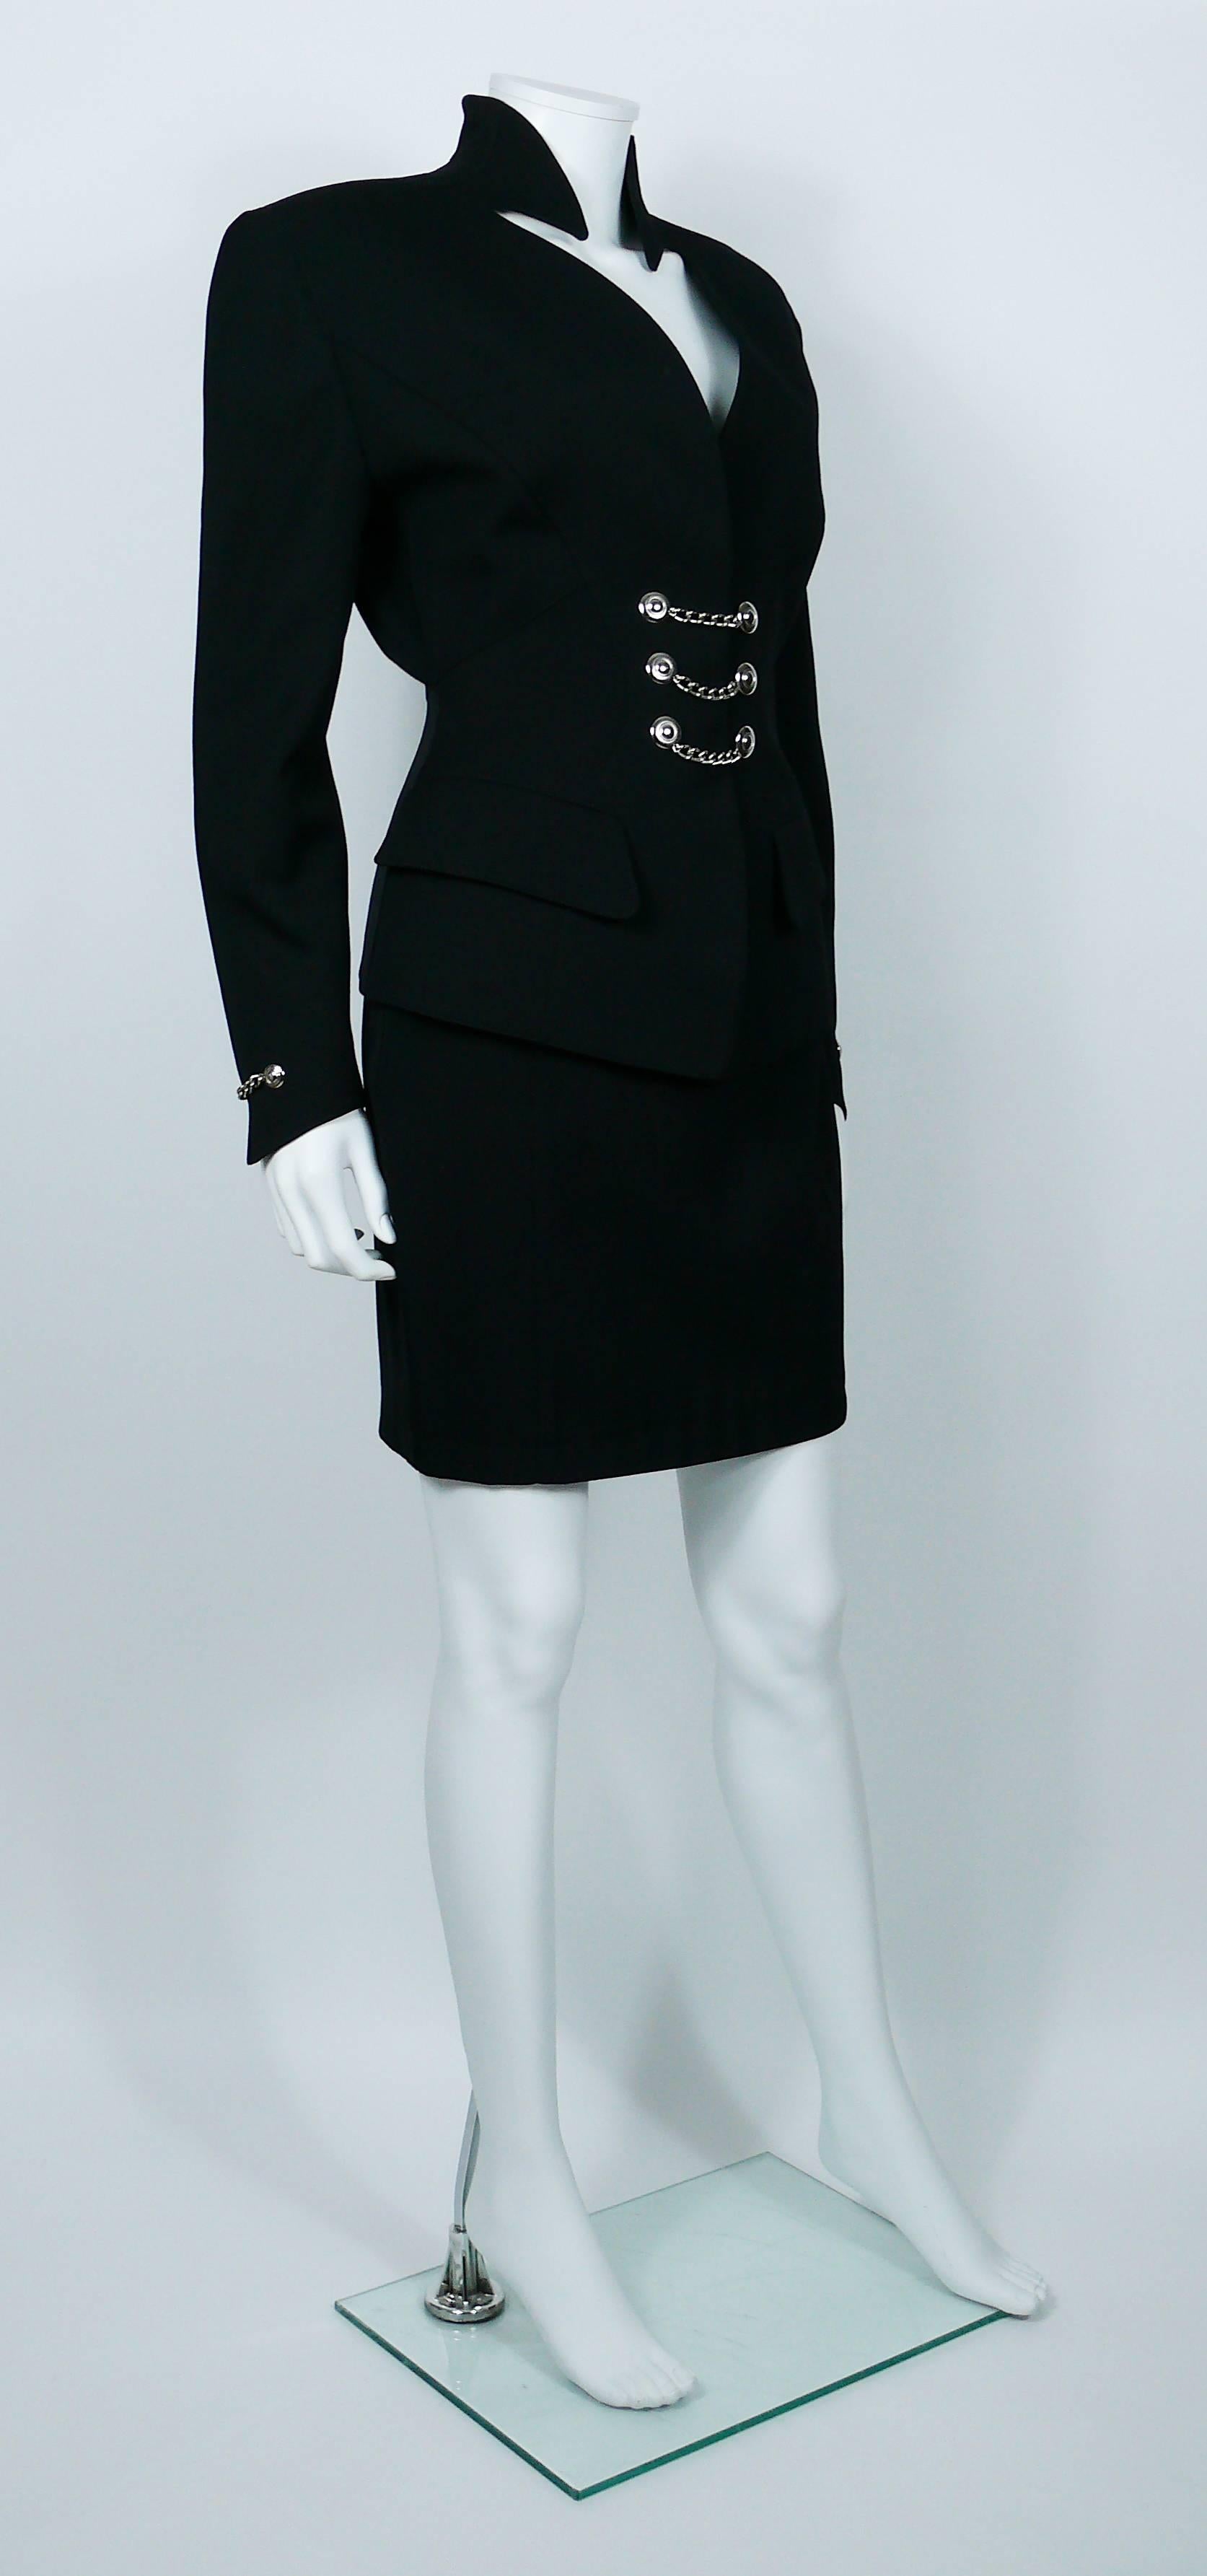 THIERRY MUGLER vintage black wool skirt suit.

Tailored jacket with typical MUGLER's cut. Deep neckline and gorgeous graphic collar. Two flap pockets. Snap closure at the front embellished with three silver toned chains. Shoulder pads. Jacket is